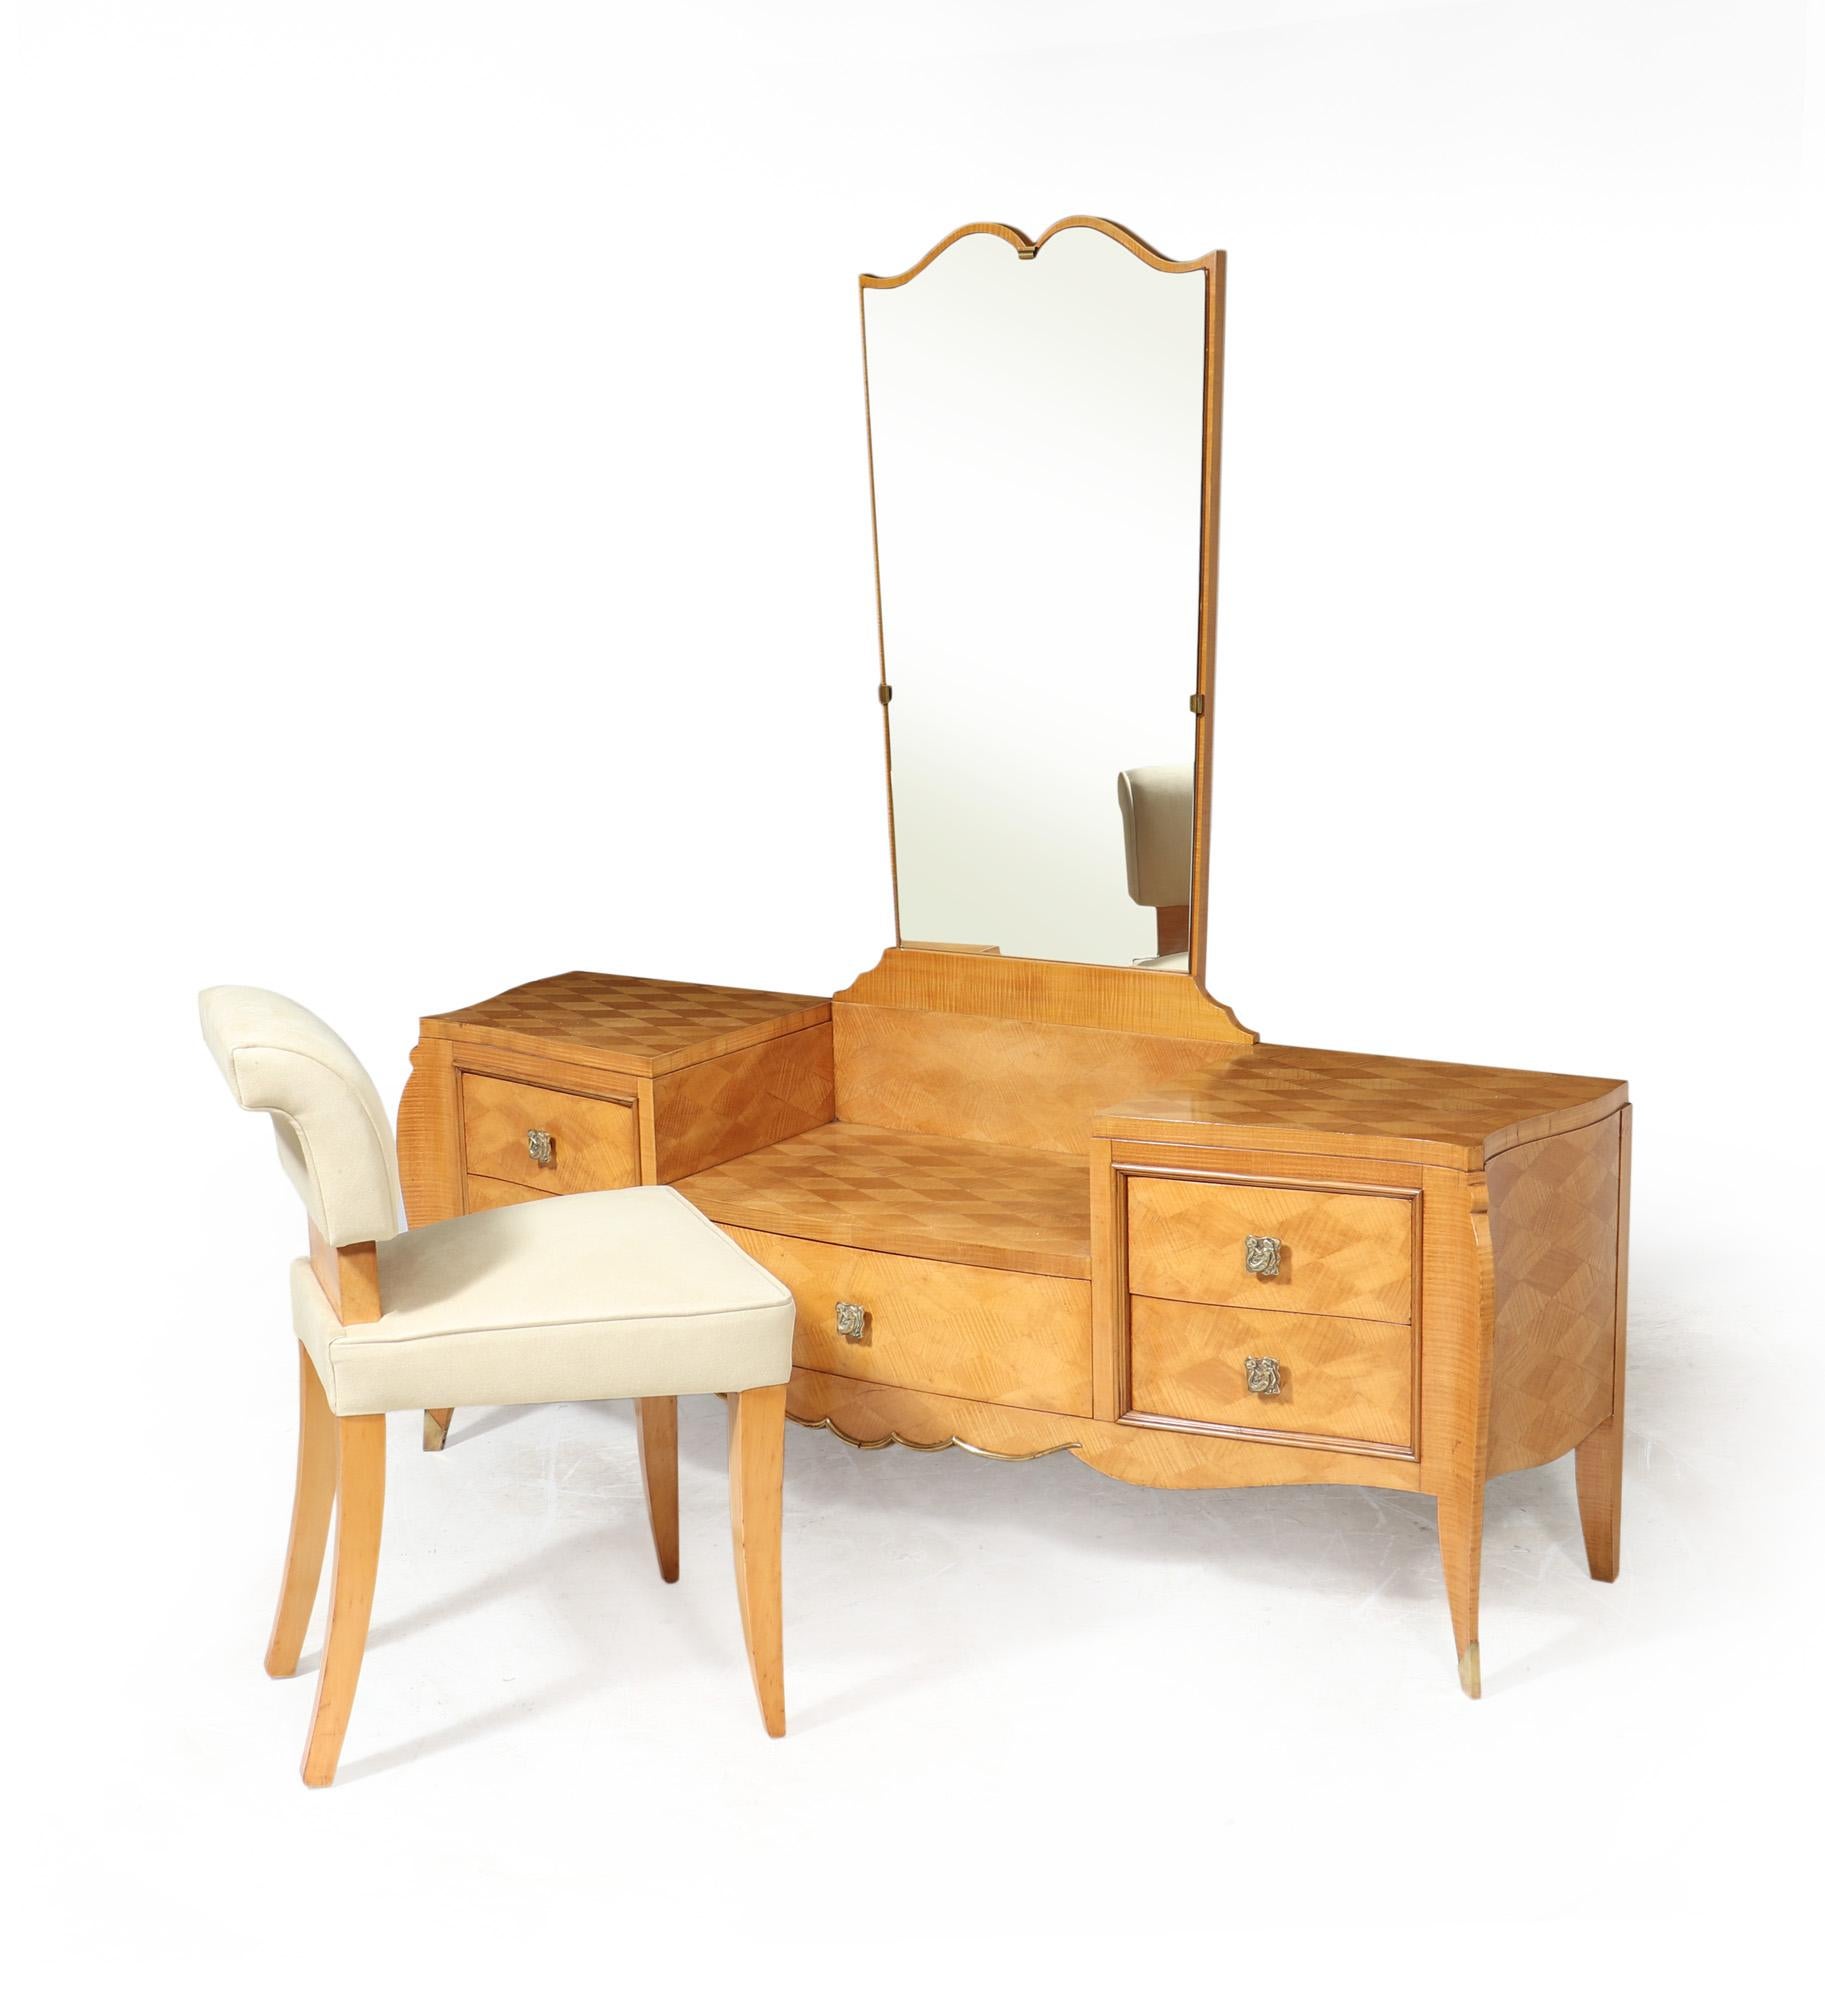 ART DECO DRESSING TABLE AND STOOL 
A French Art Deco dressing tale with serpentine shape covered in sycamore parquetry designed and produced in Paris by Jules Leleu, it has five drawers with mermaid cast bronze handles and sabre legs, the mirror